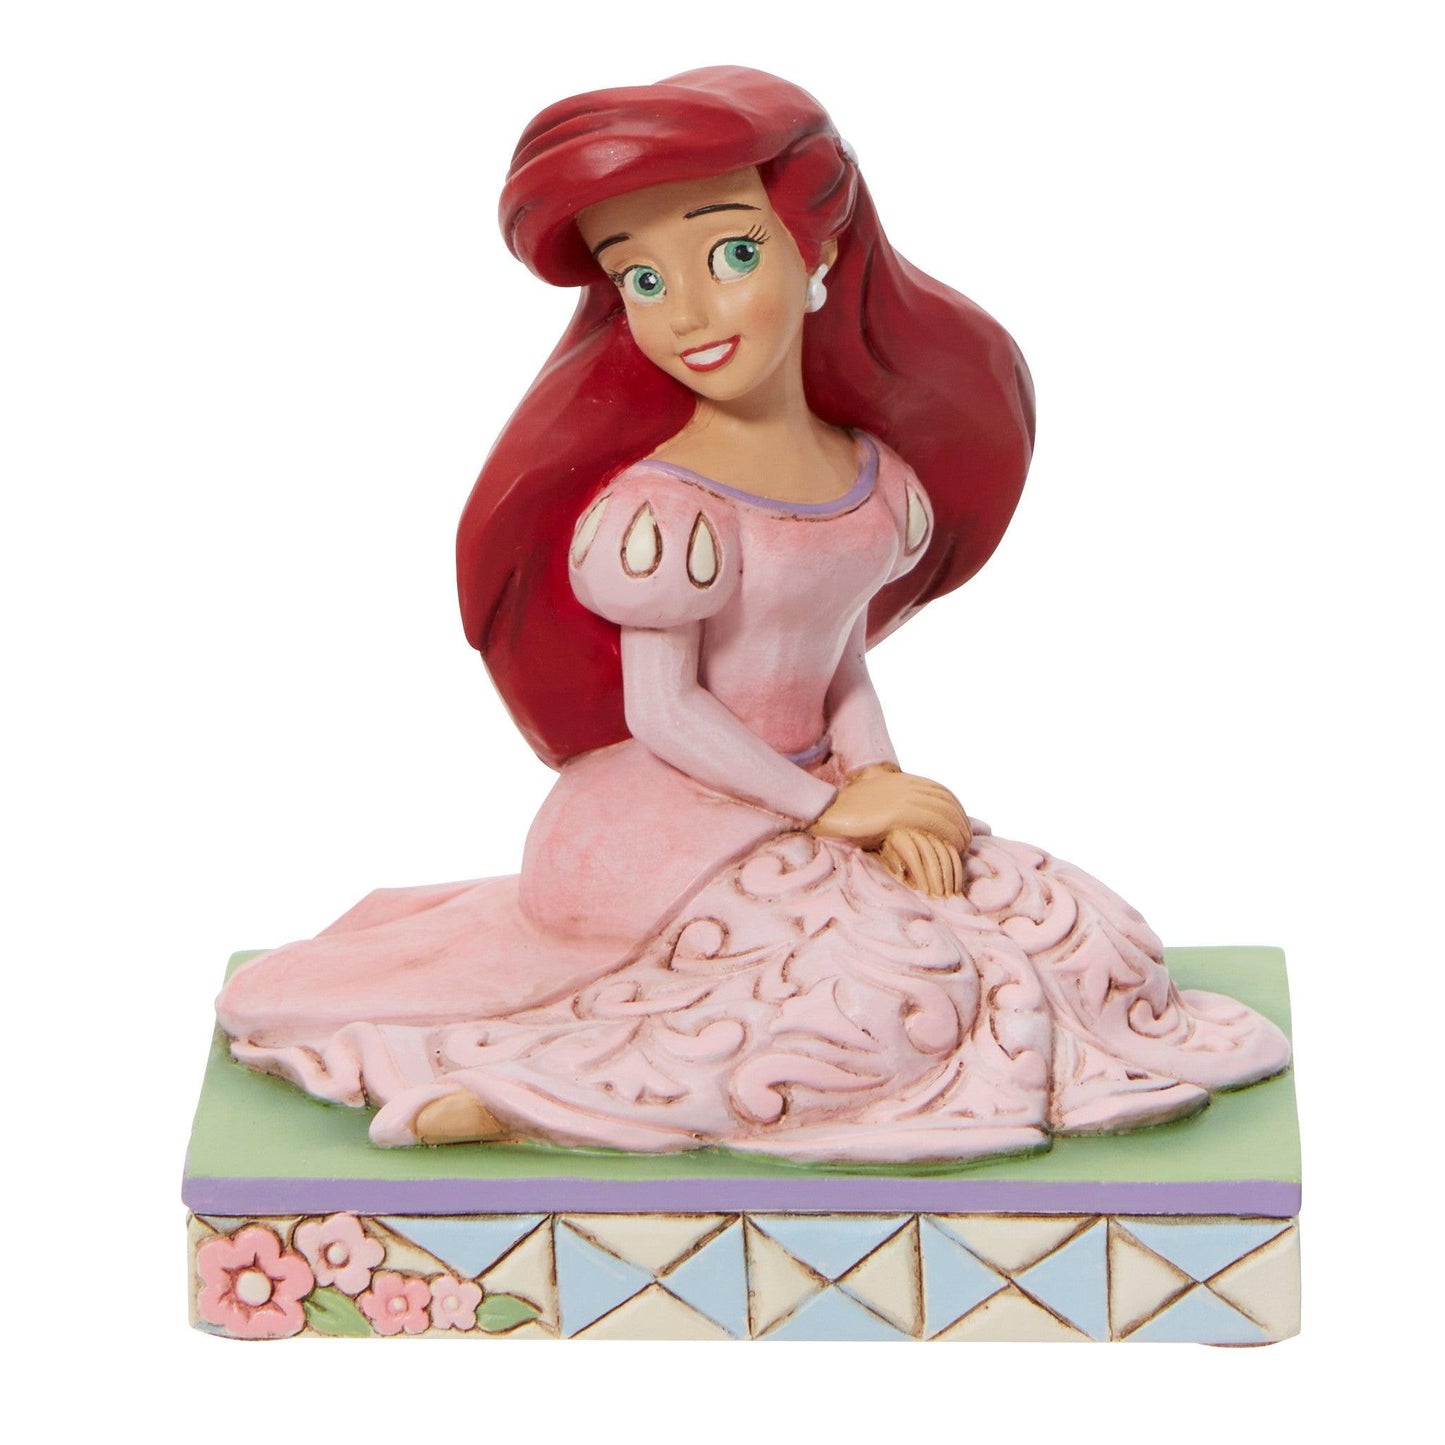 Ariel Personality Pose Figurine - Gallery Gifts Online 